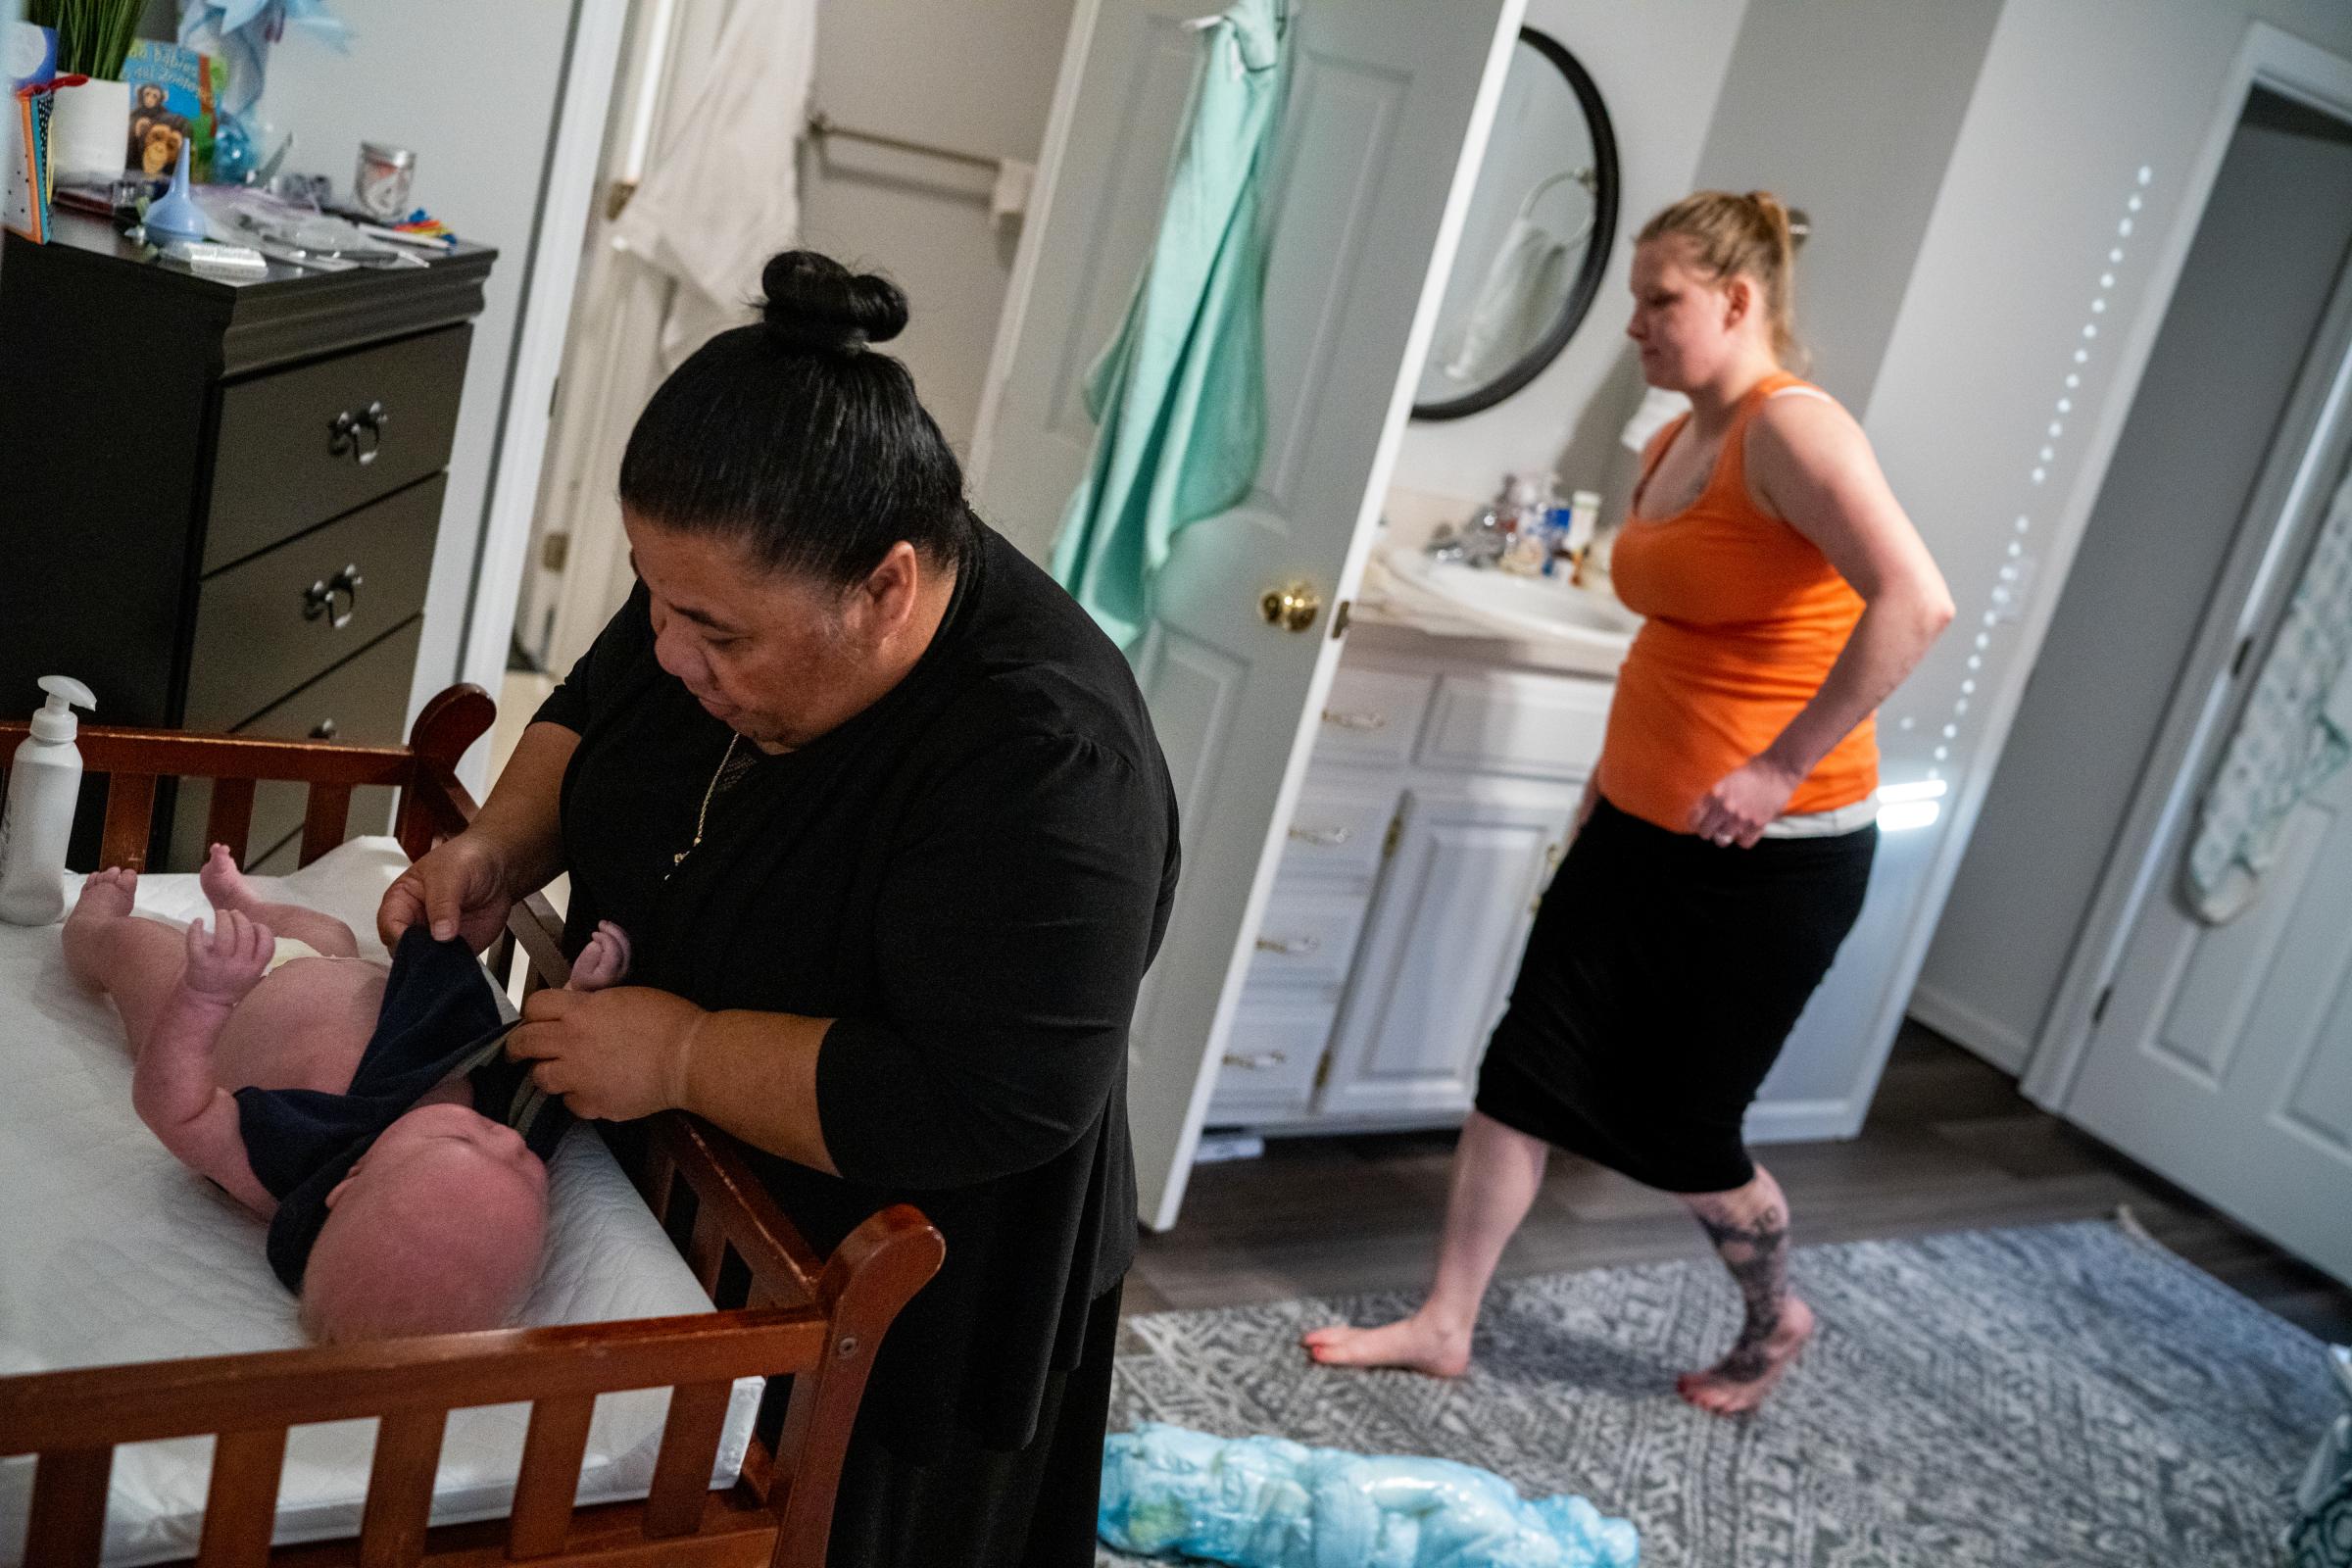 A House Full of Blessings - When baby Joshua Williams needed a bath, Sr. Anita asked...